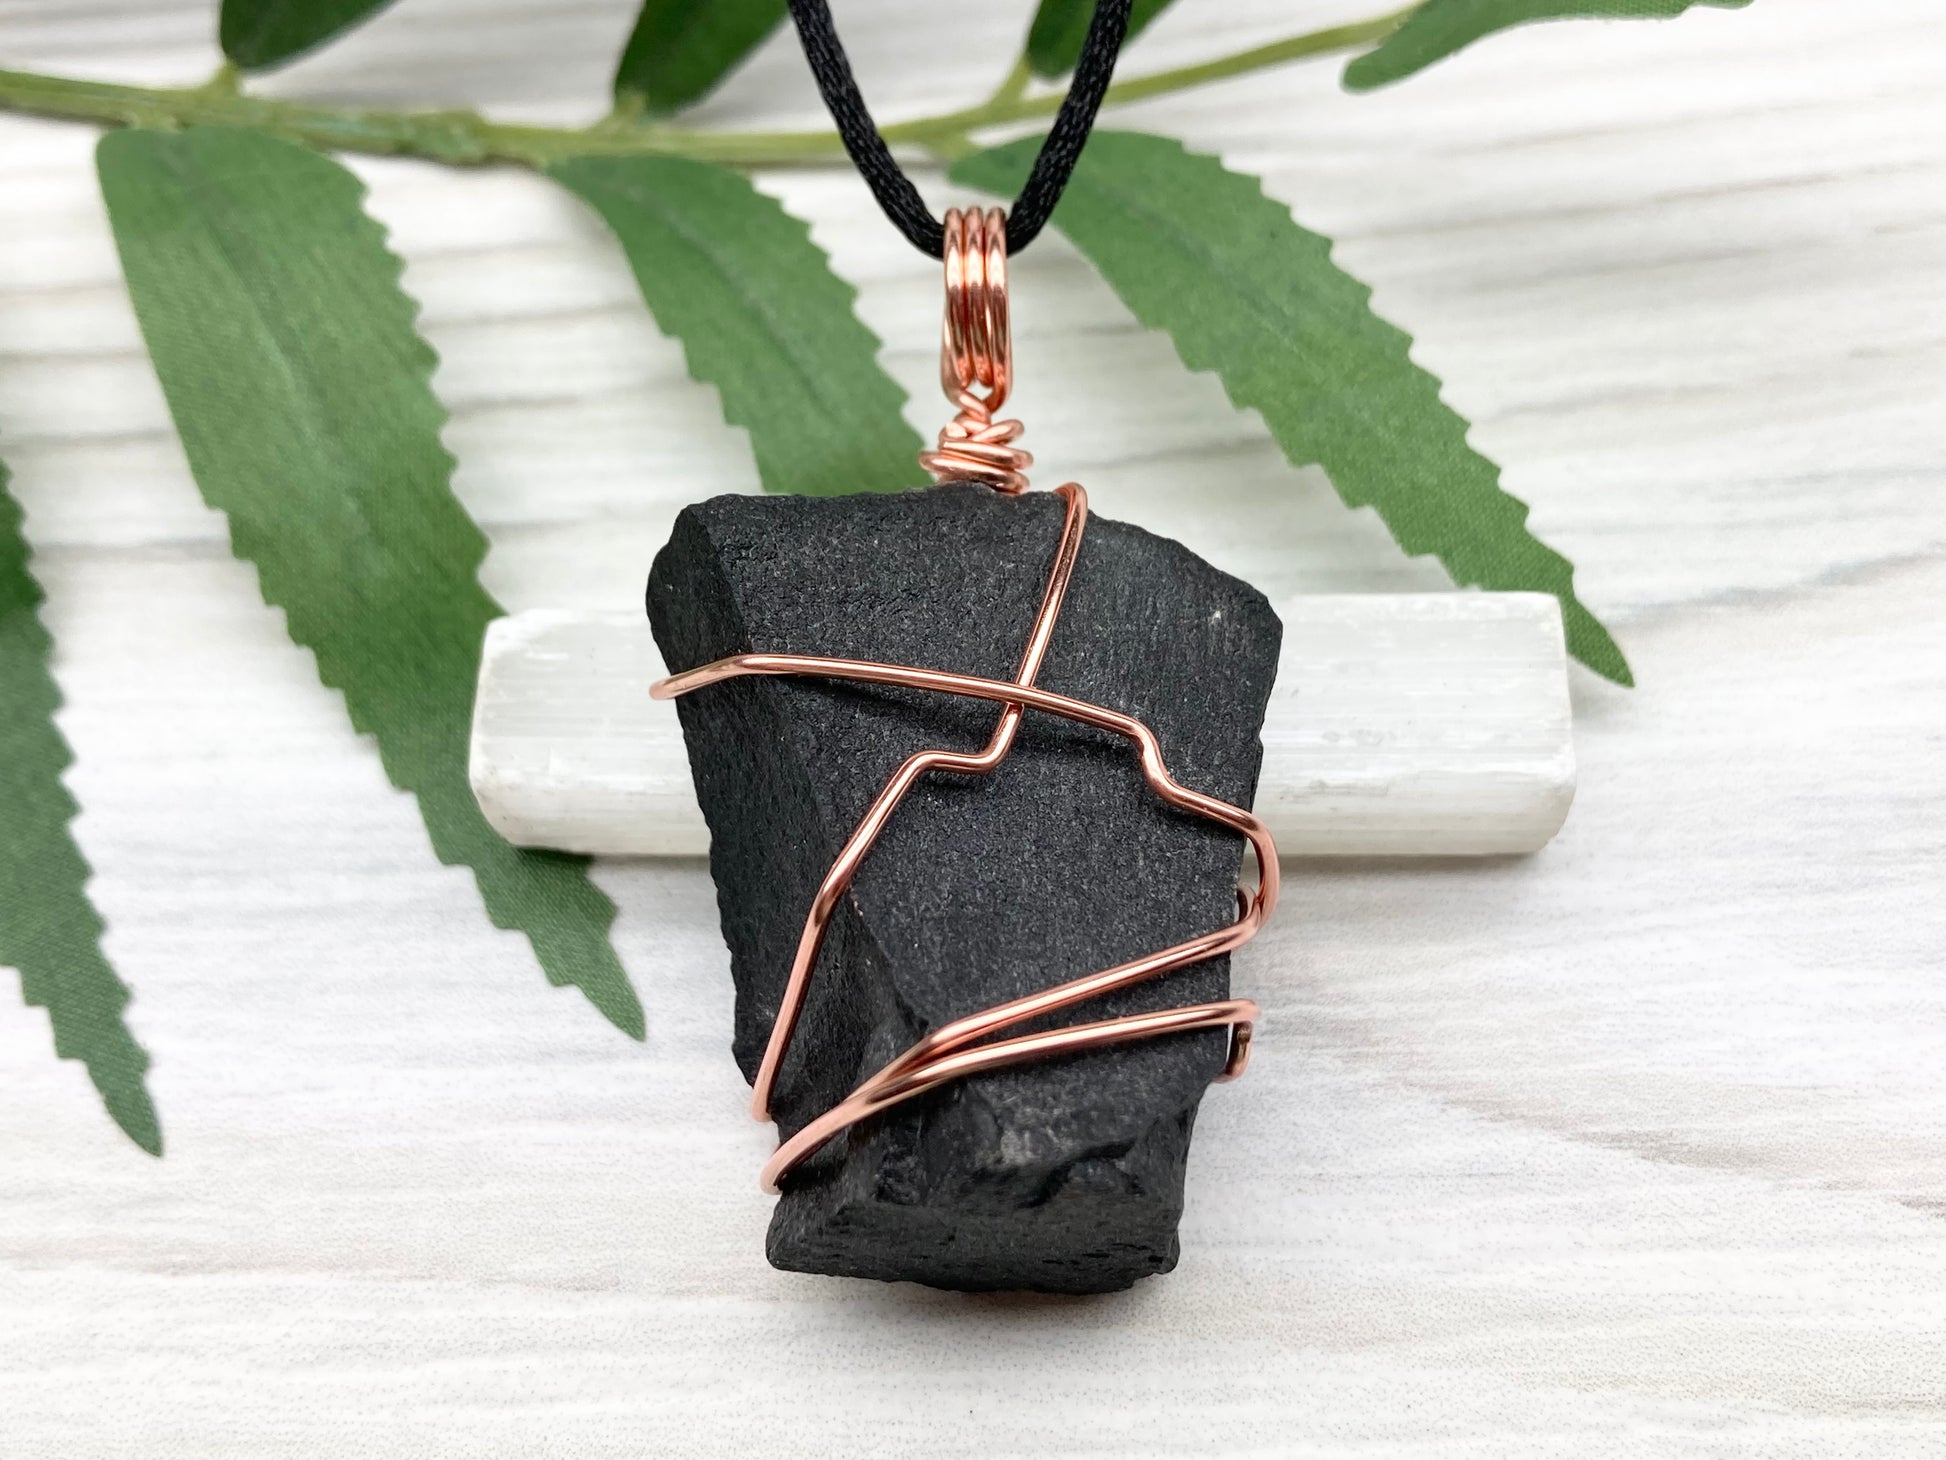 Black Agate Necklace. Raw Black Agate Stone Wrapped With Copper Wire. This pendant Is A Bit Chunky. Comes On A Black Chain. New Age Spiritual Jewelry.